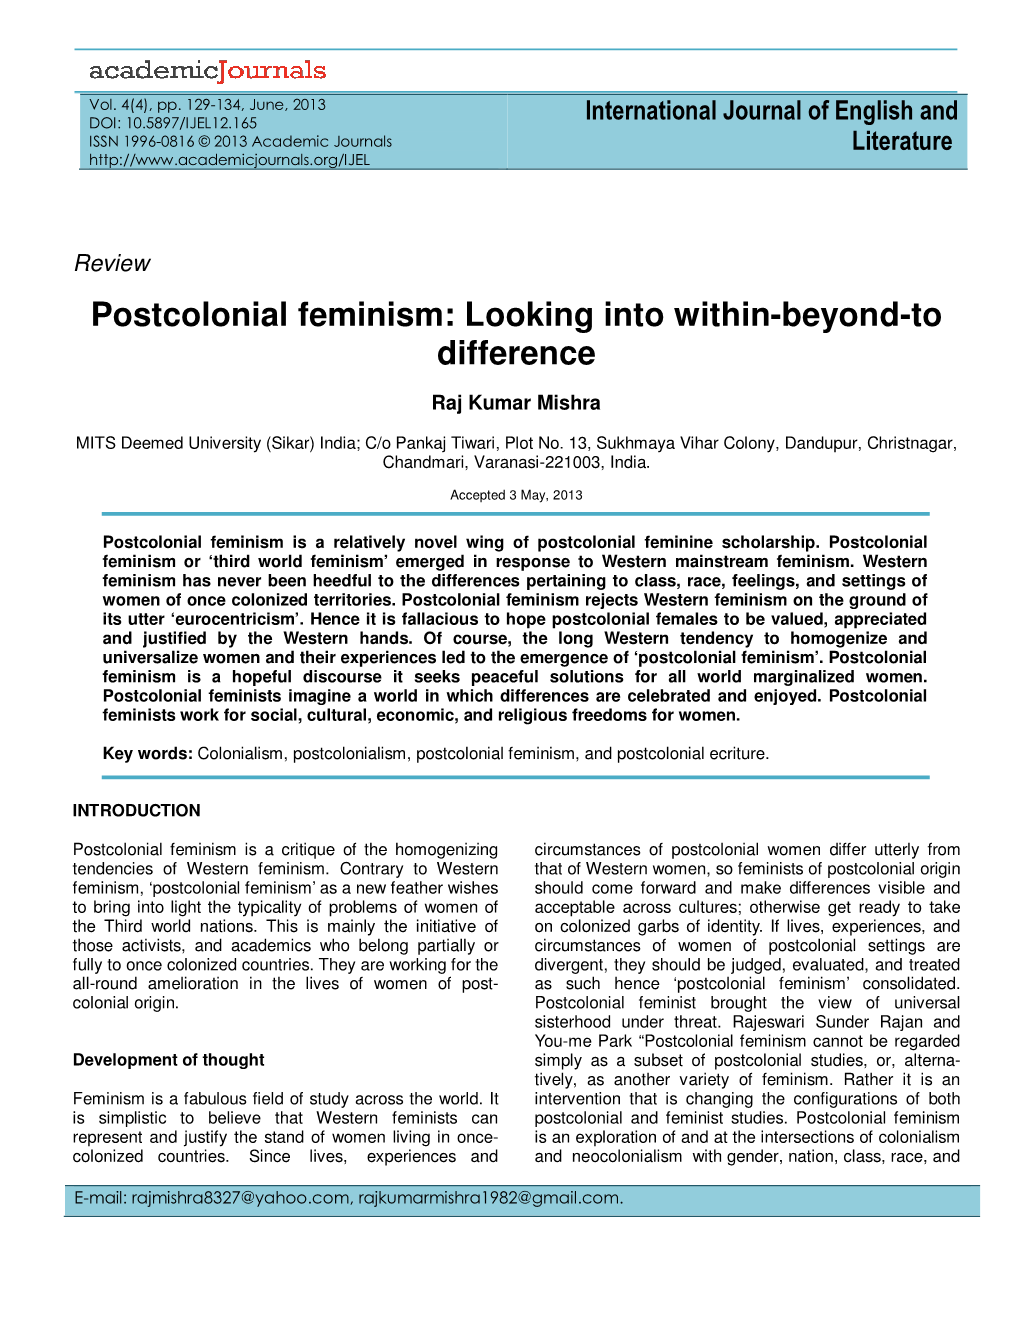 Postcolonial Feminism: Looking Into Within-Beyond-To Difference